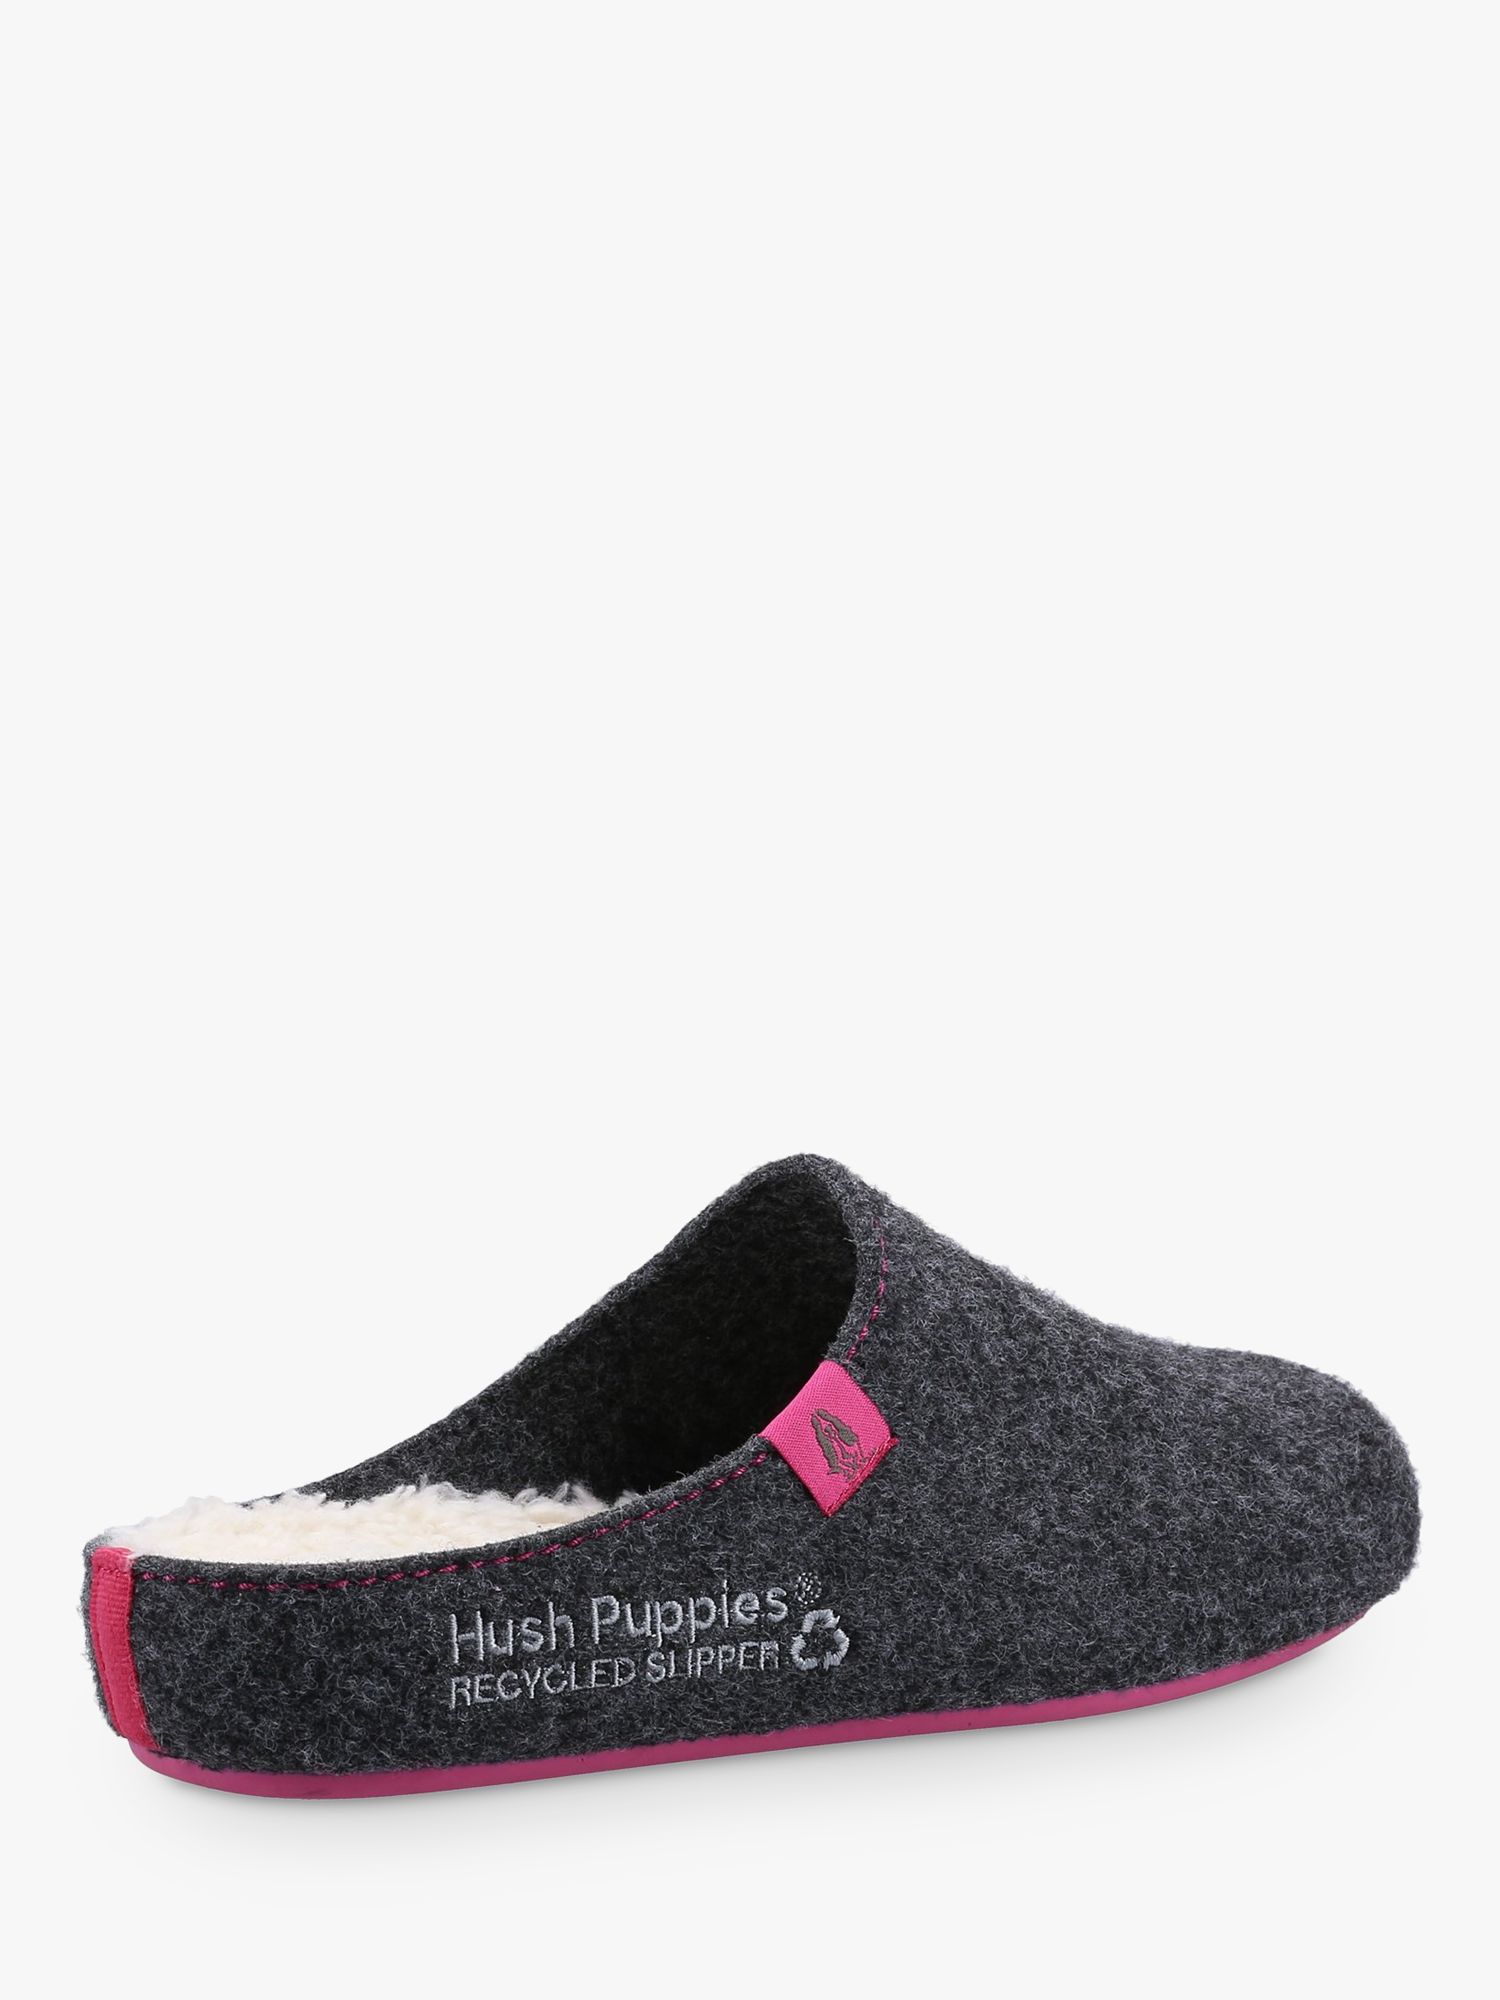 Buy Hush Puppies The Good Mule Slippers, Charcoal Online at johnlewis.com